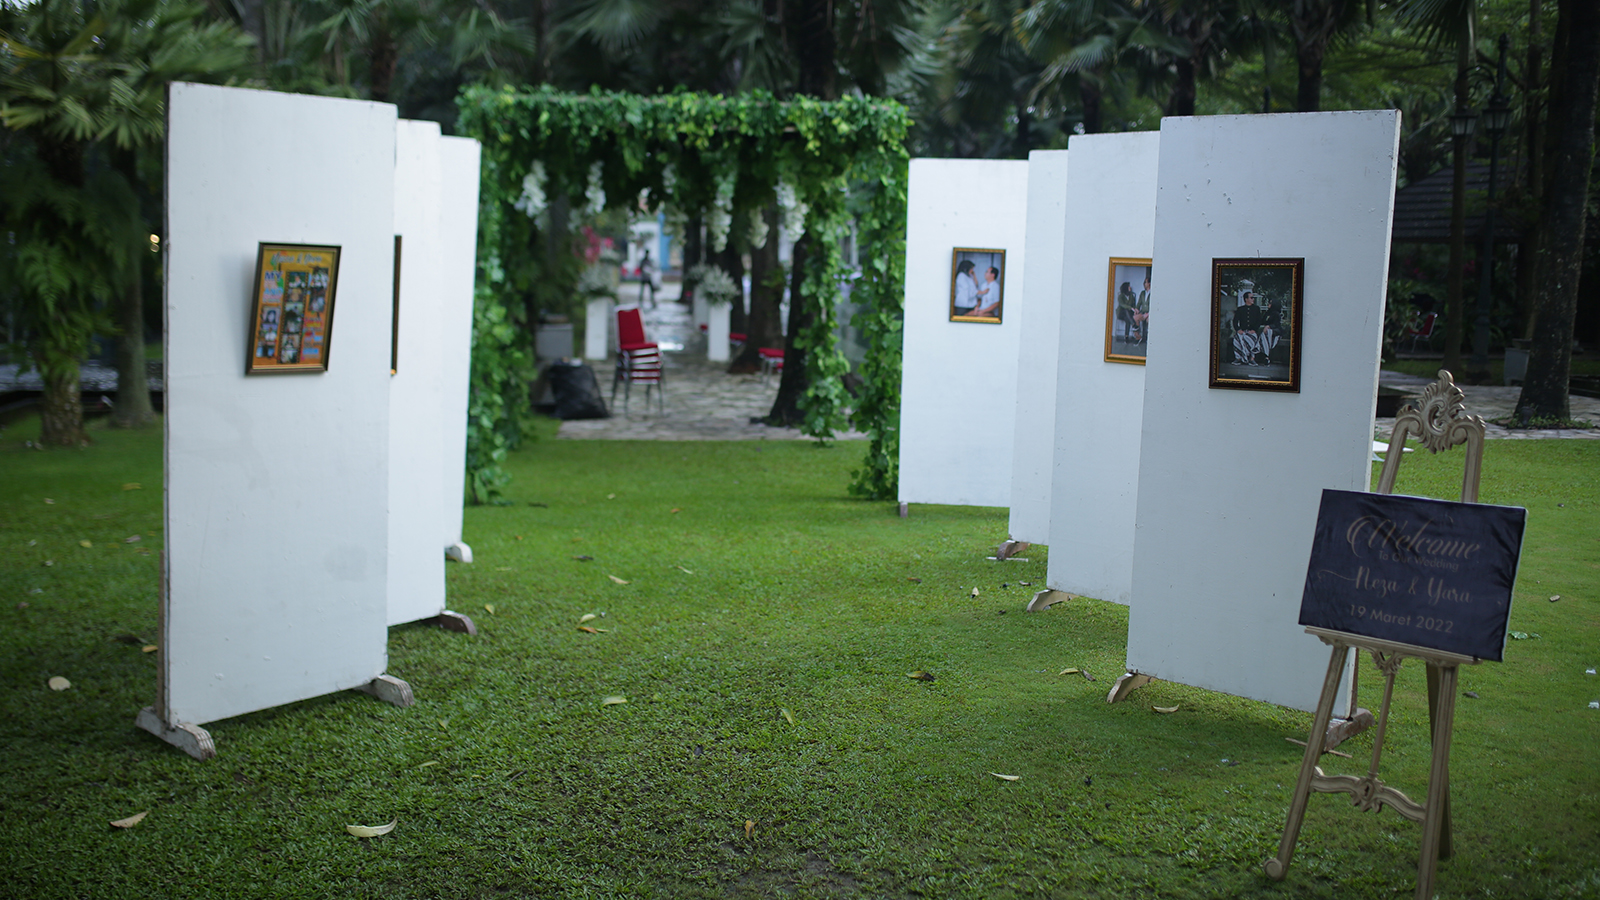 Sukoharjo City, Central Java, Indonesia - March 19, 2022 : Some pre-wedding photos displayed and exhibited in front of an outdoor wedding